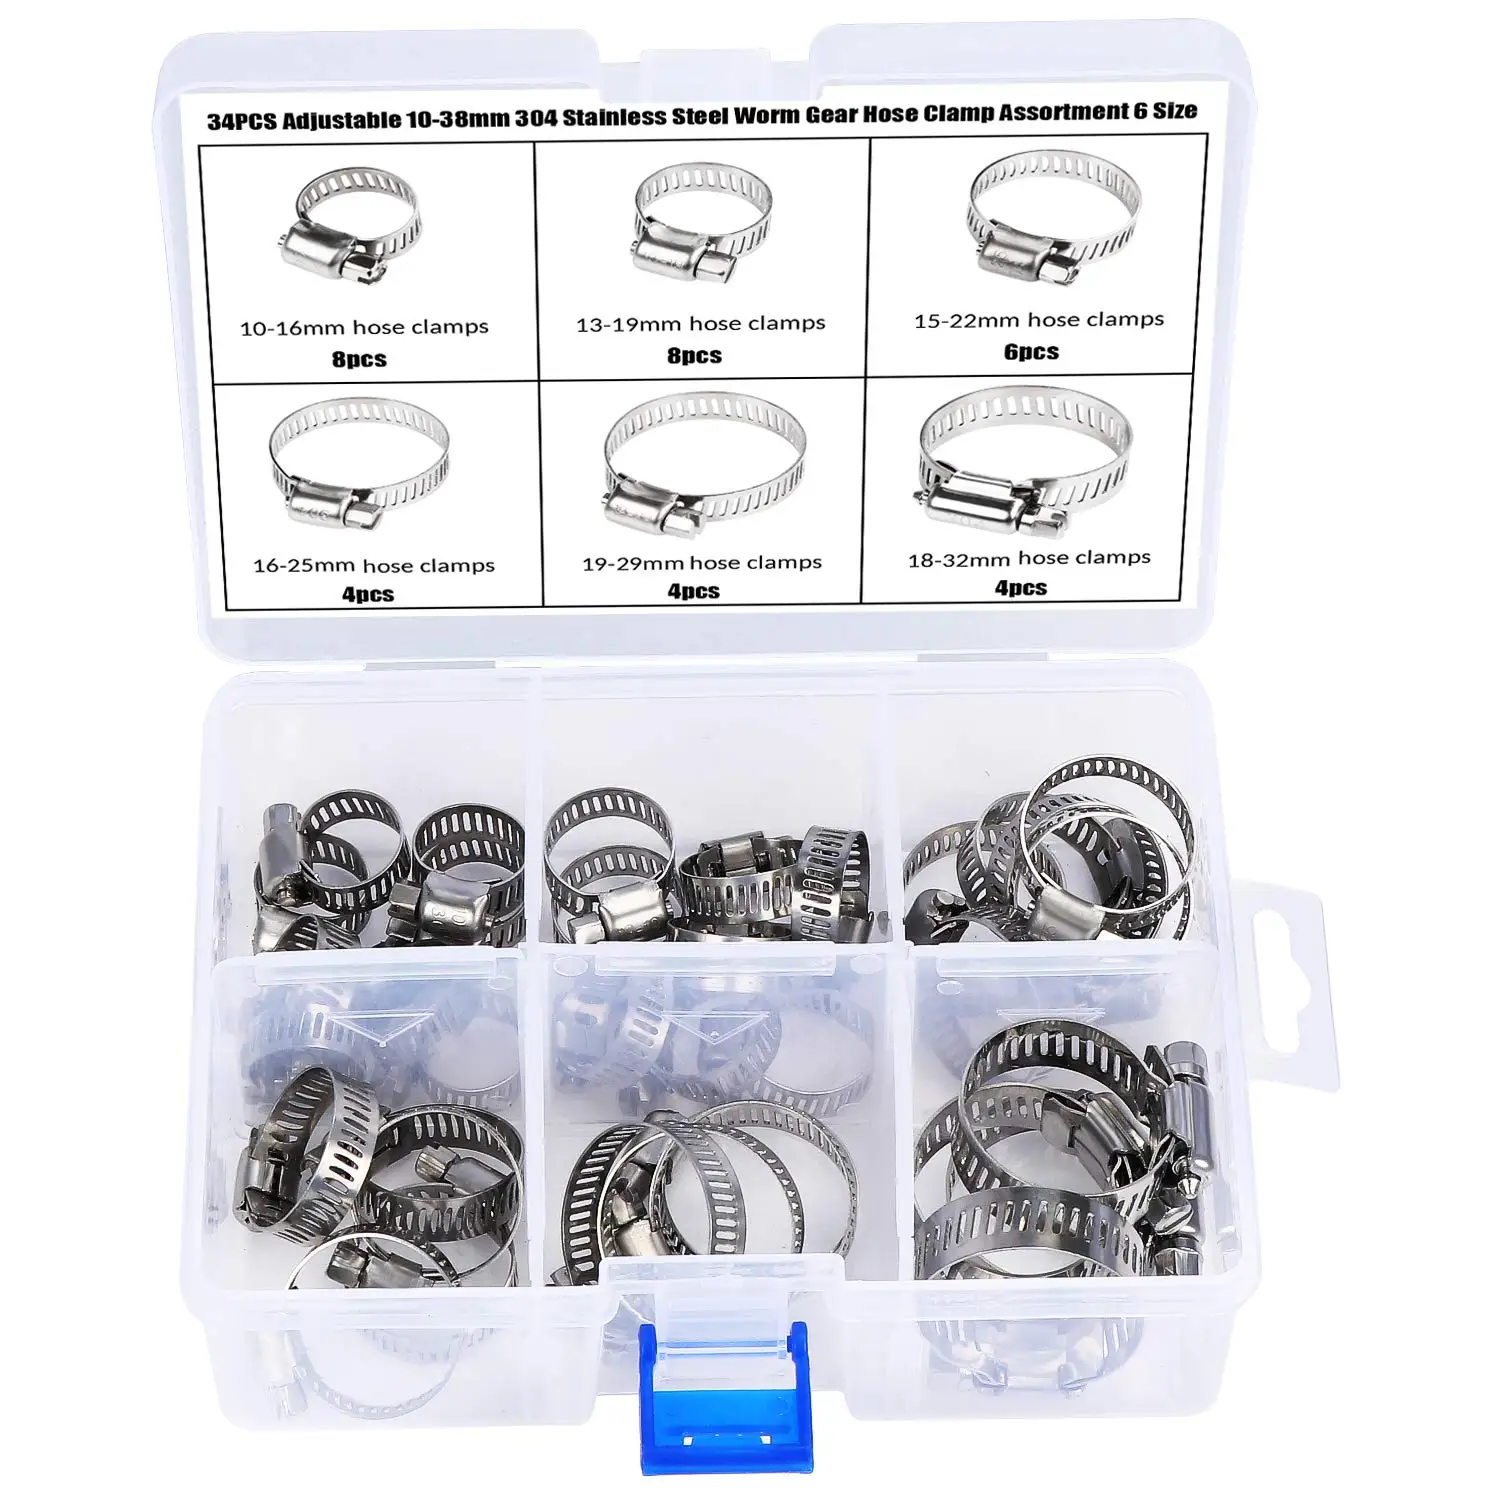 

Hose Clips Adjustable 10-38mm 304 Stainless Steel Worm Gear Hose Clamp Assortment,5/8"- 1-1/16" 7 Sizes,34-Pack